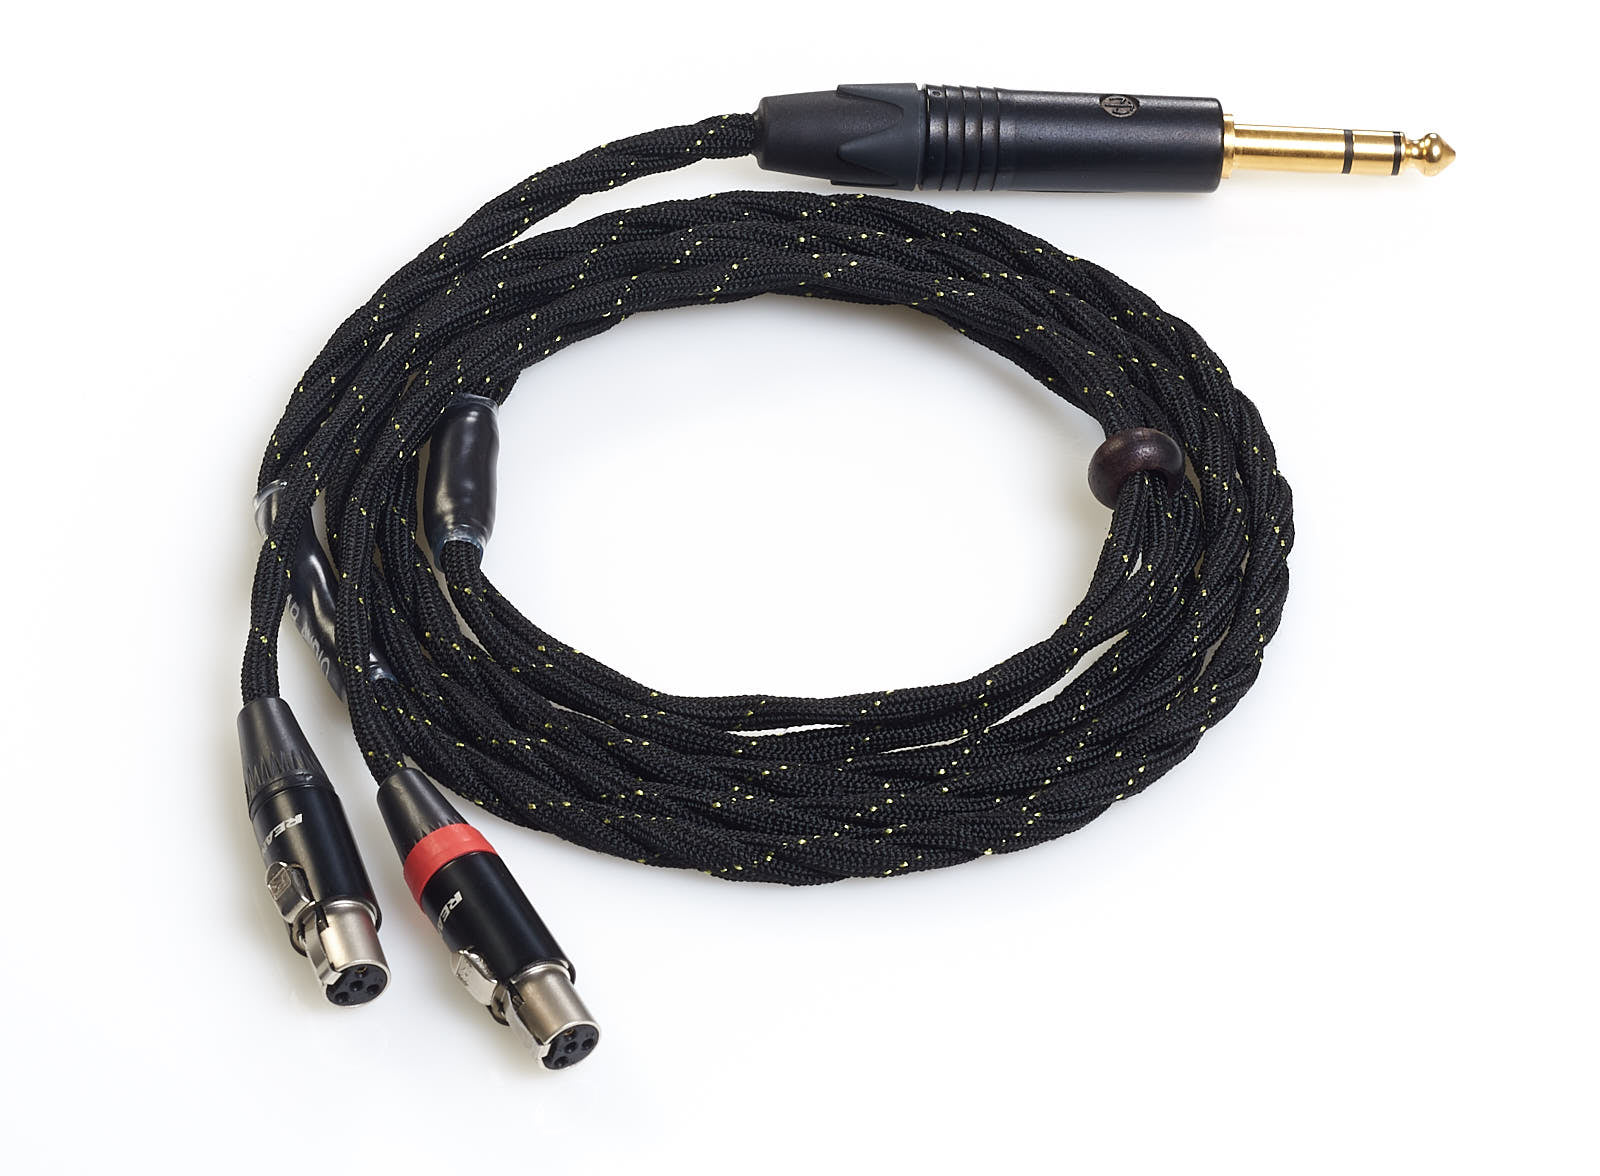 LCD Boom Microphone Cable - Audeze LLC